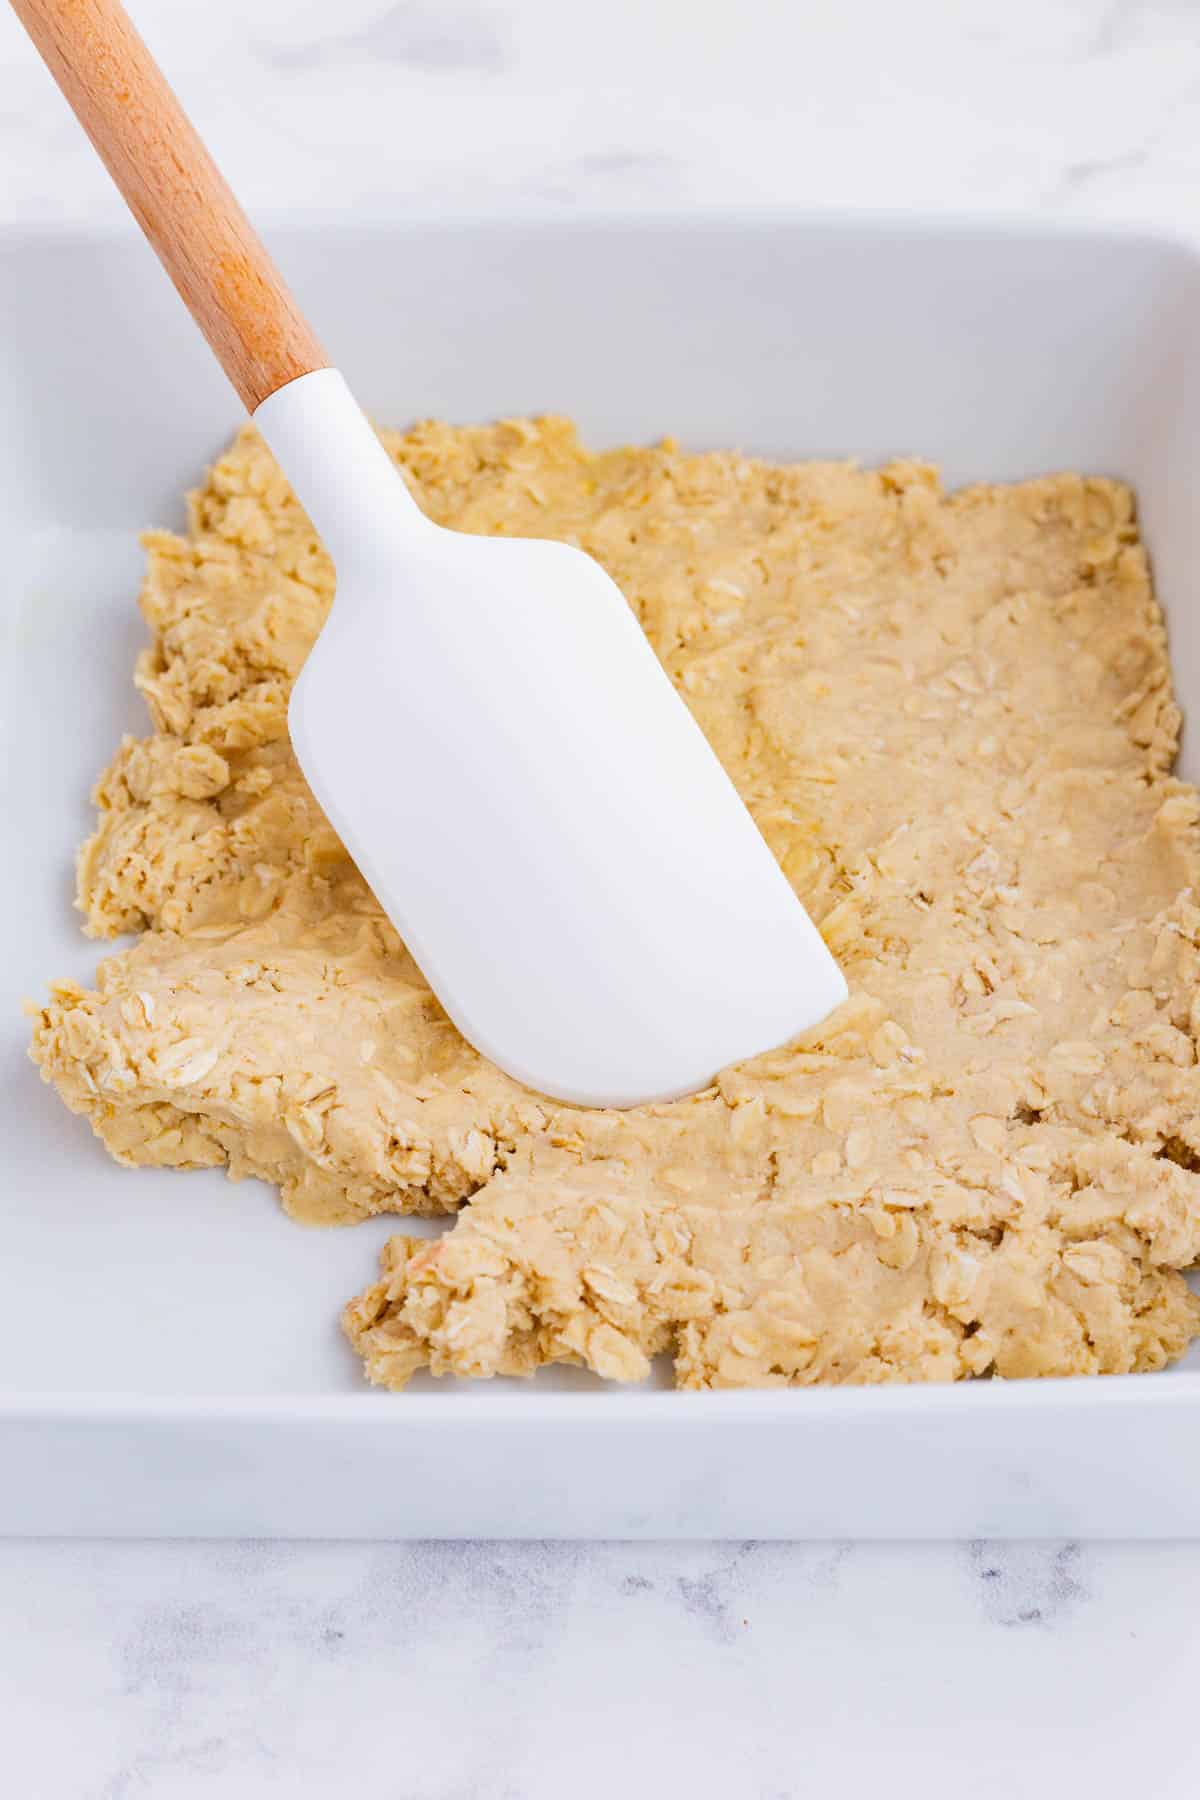 Shortbread dough is pressed into a baking dish.